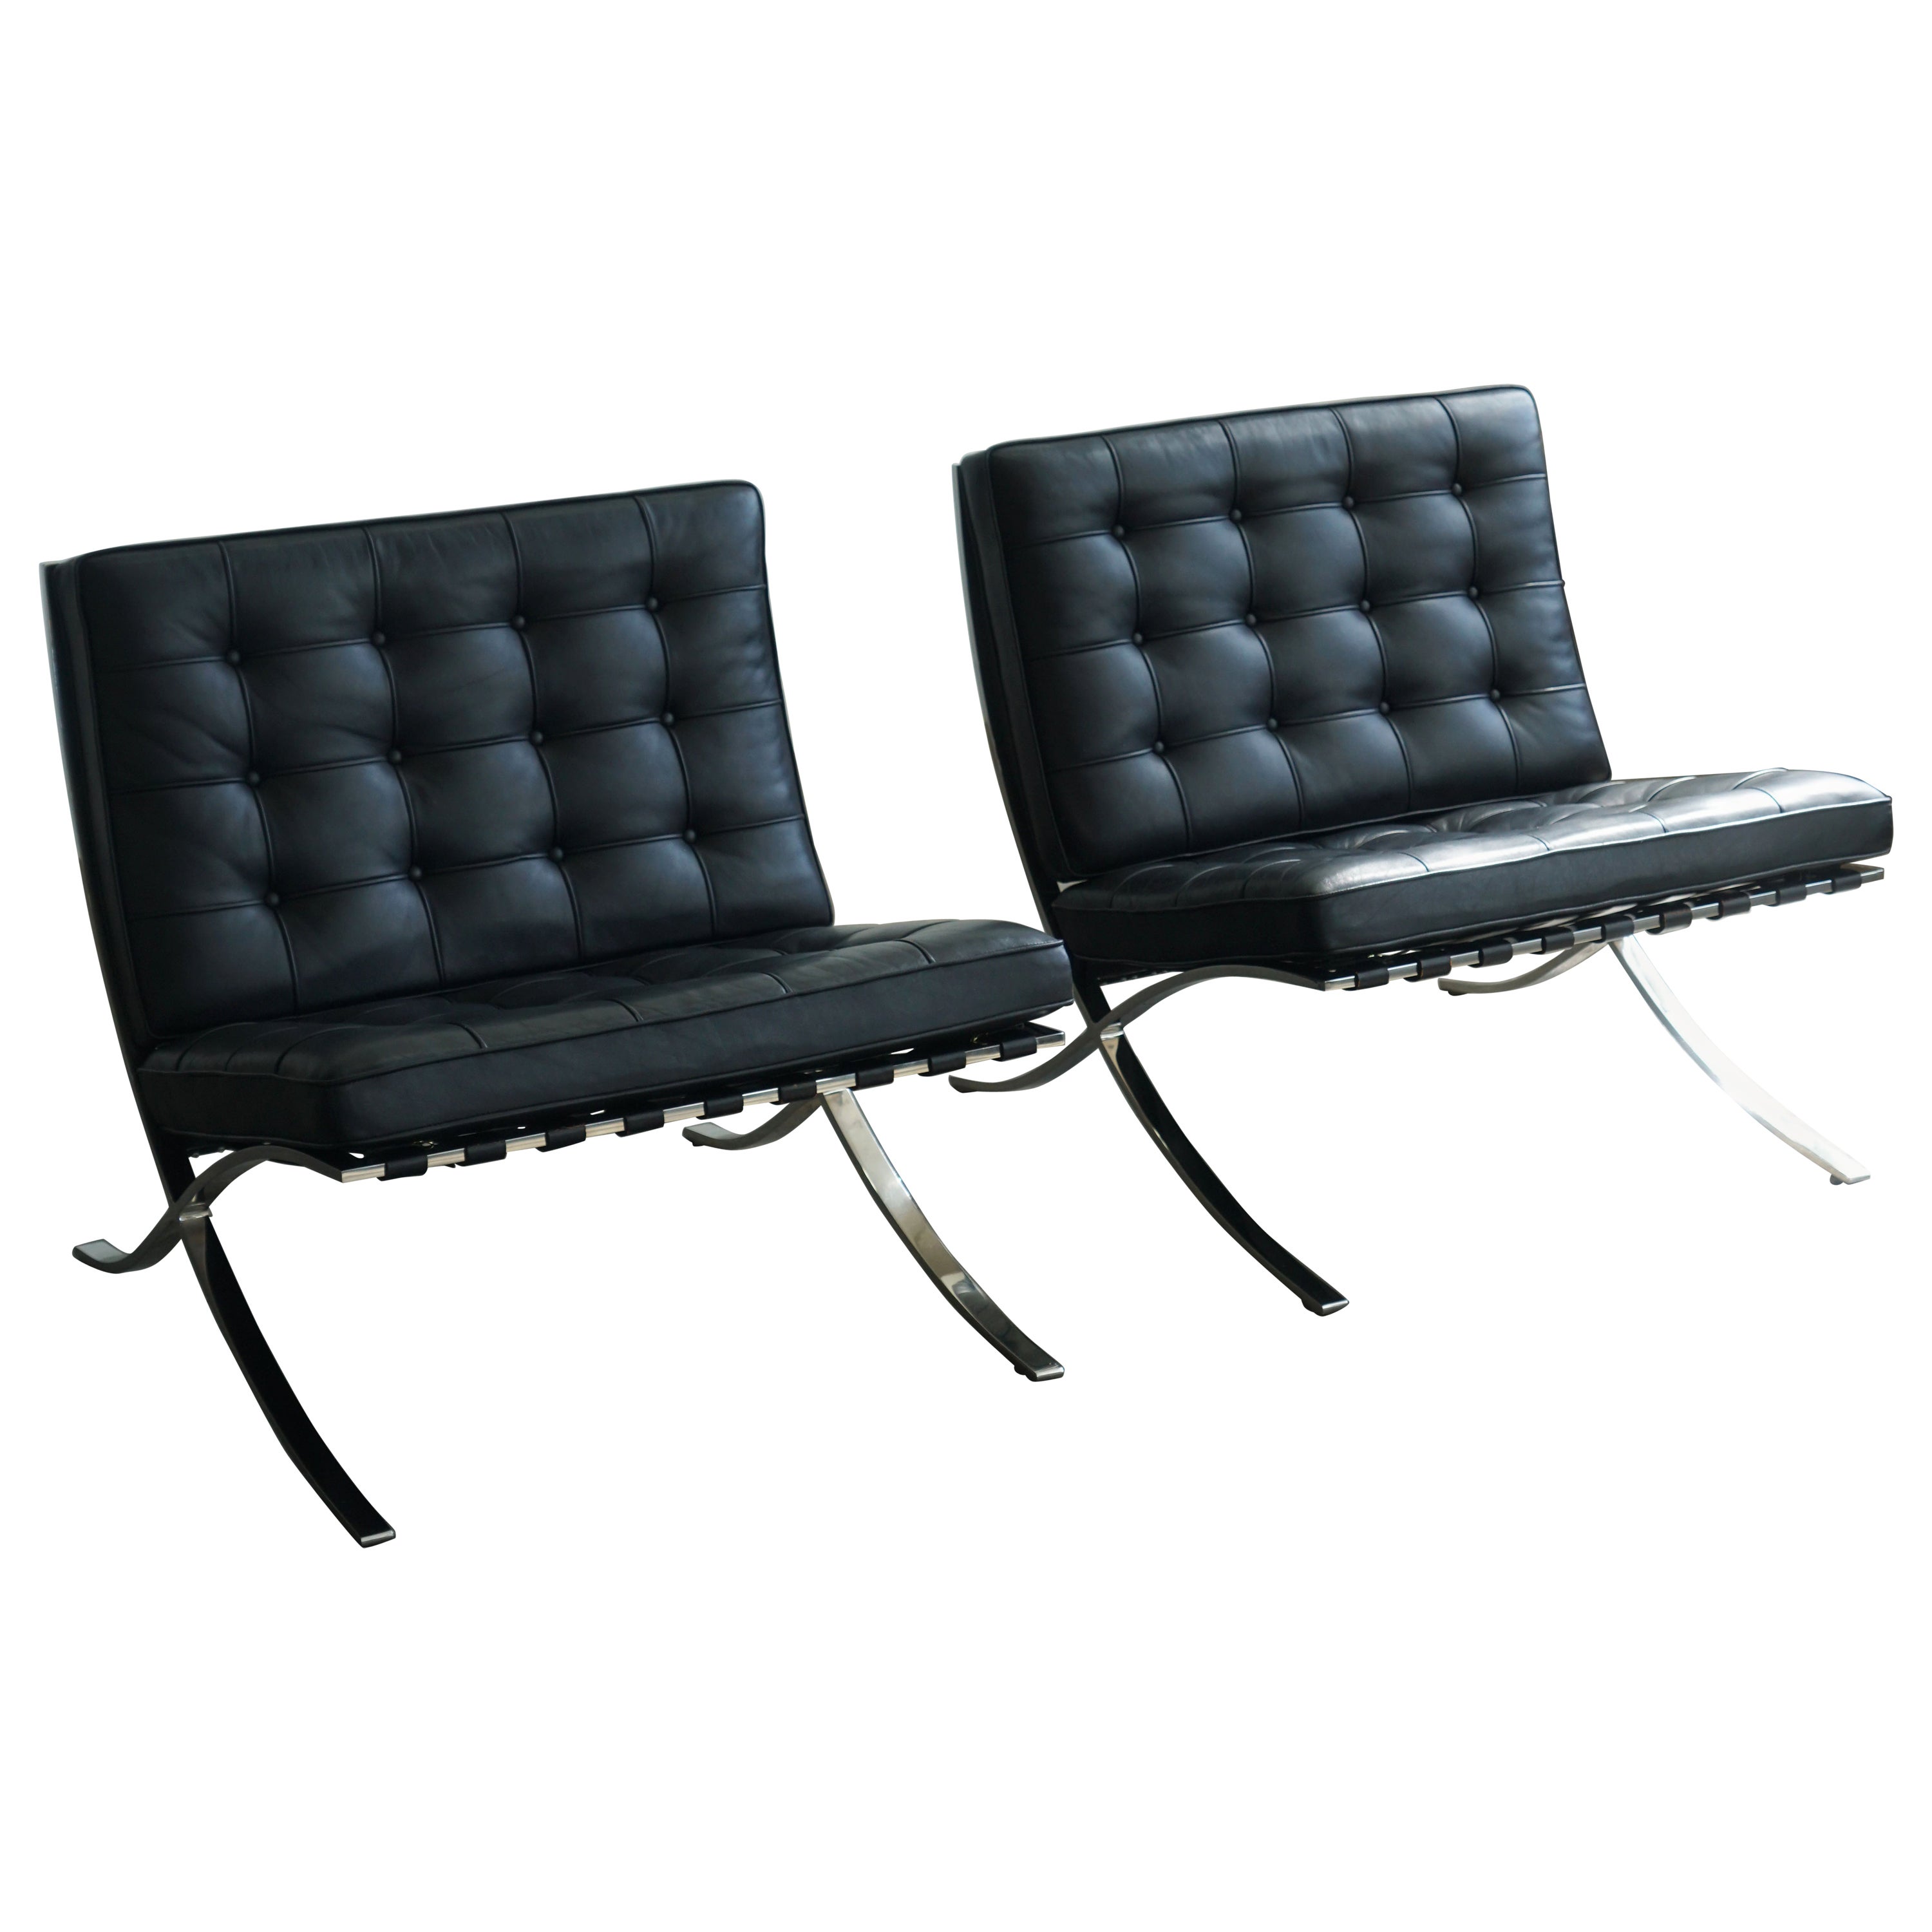 Knoll Barcelona Lounge Chairs by Mies van der Rohe, Black Leather 